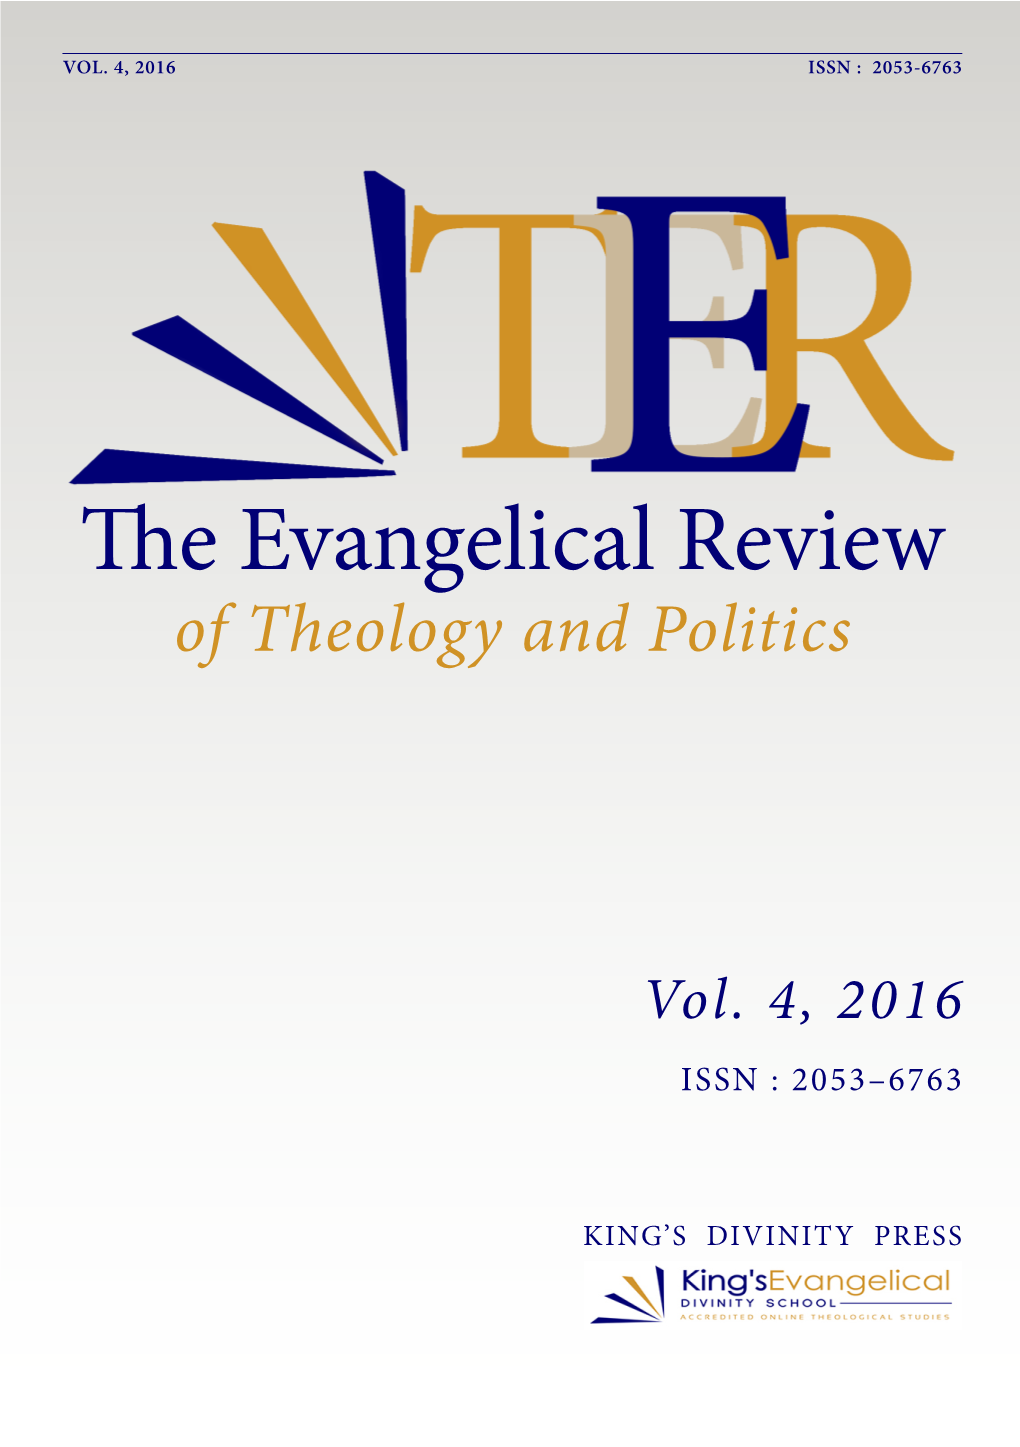 The Evangelical Review of Theology and Politics